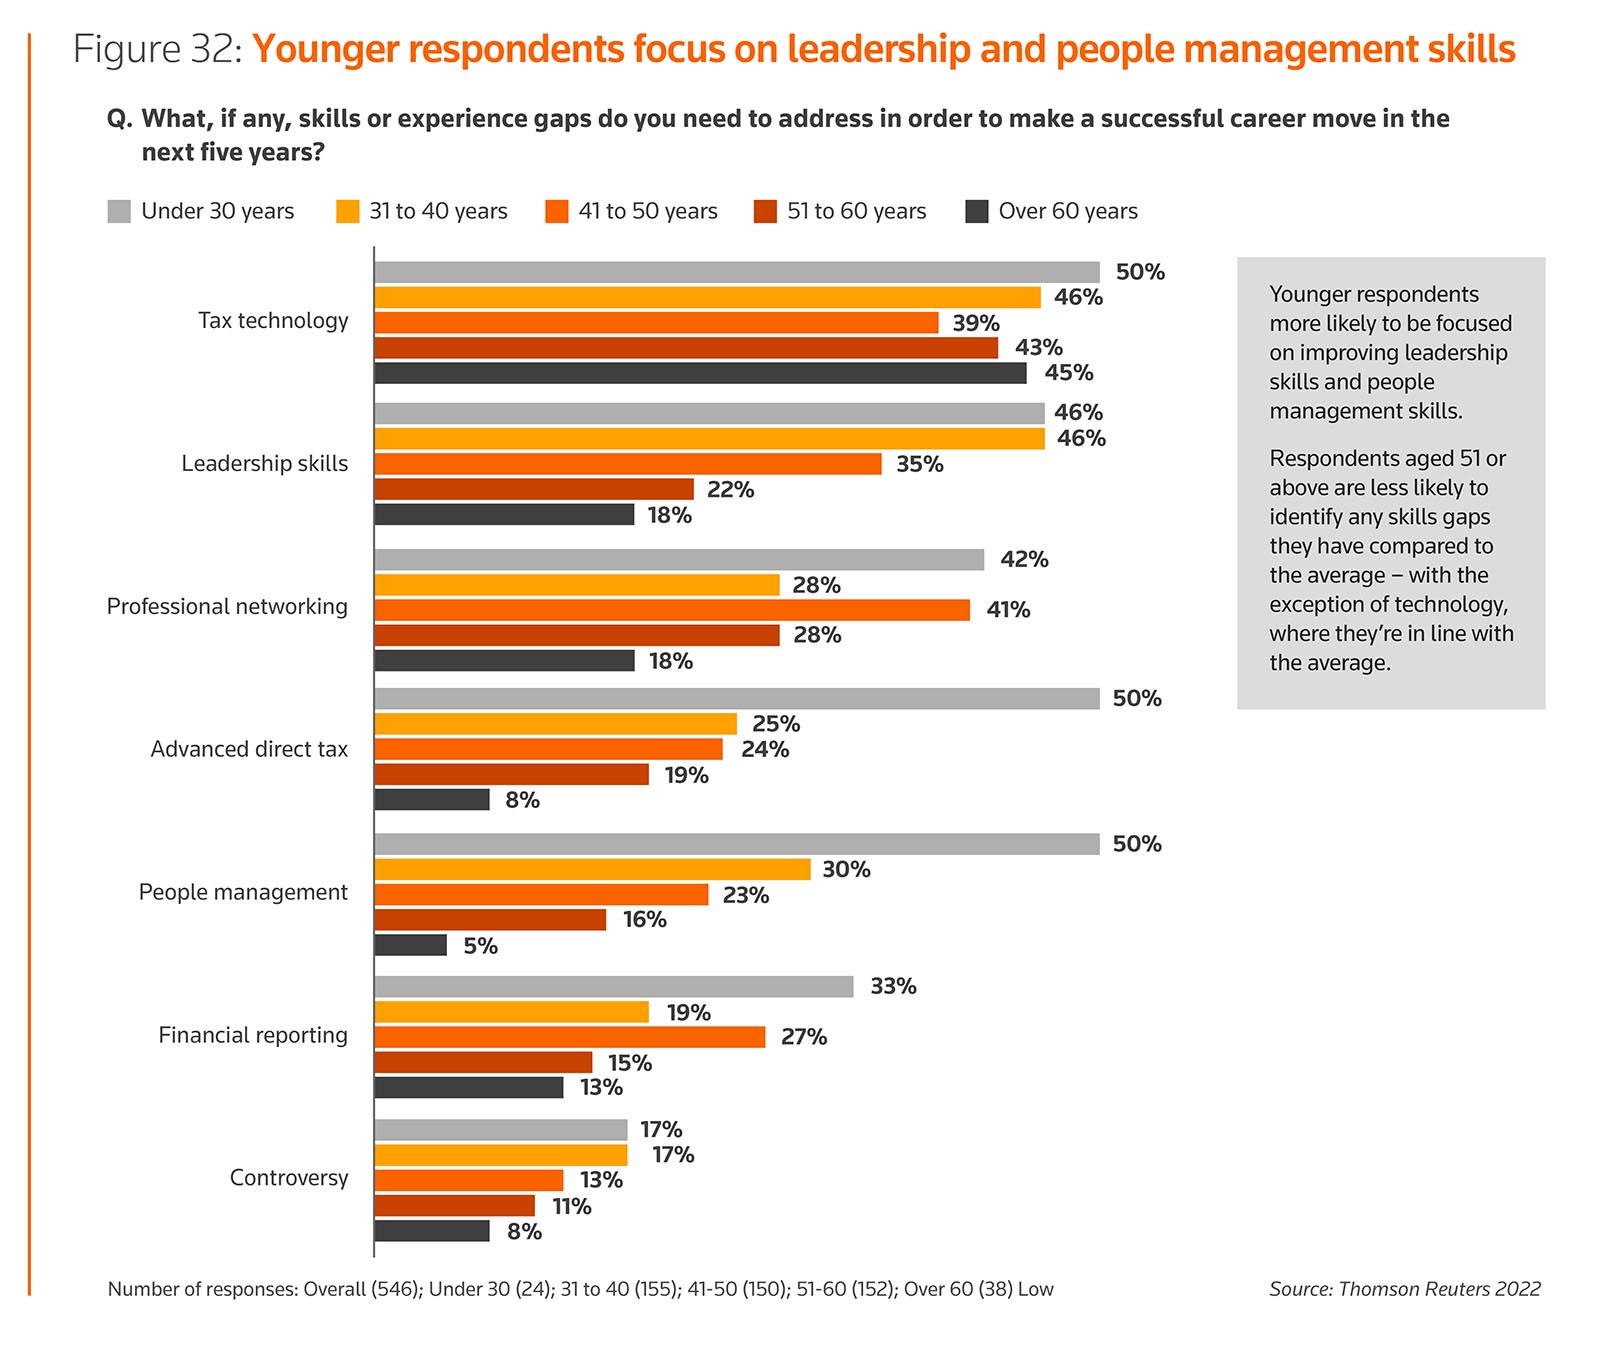 Figure 32: Younger respondents focus on leadership and people management skills